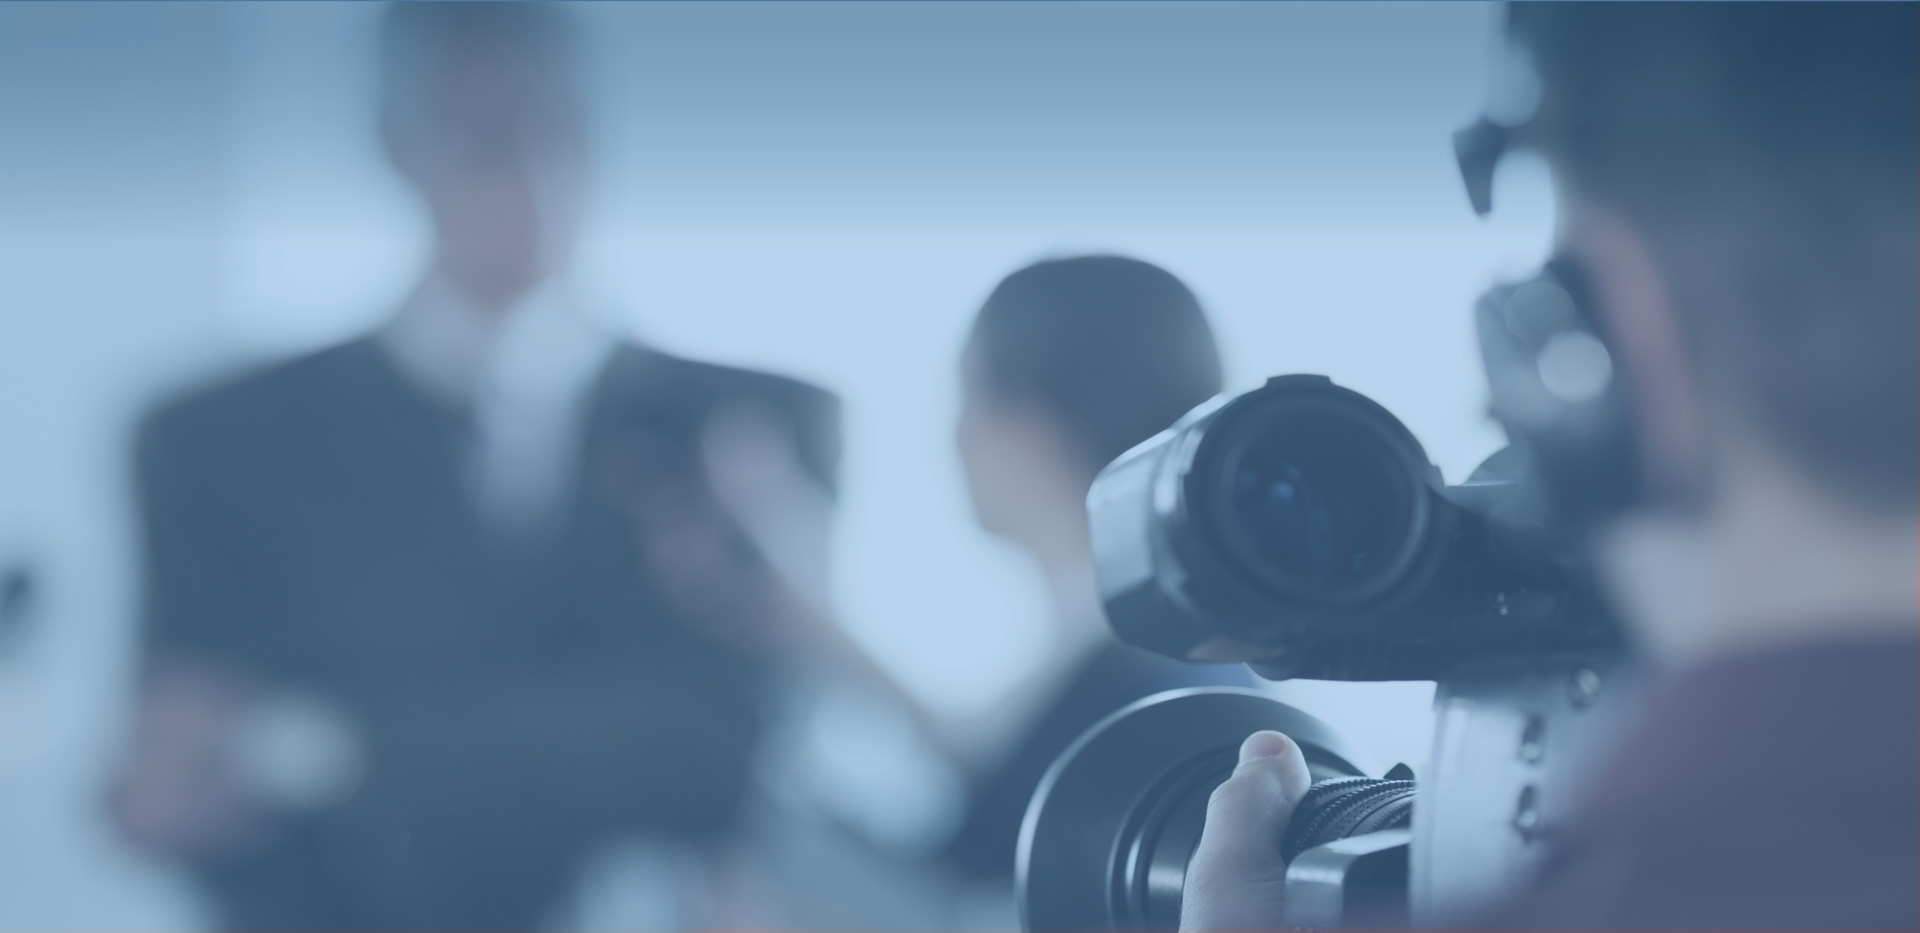 business video productions with business people on video, in the style of light gray and dark blue, overexposure effect, blurry details, transparency